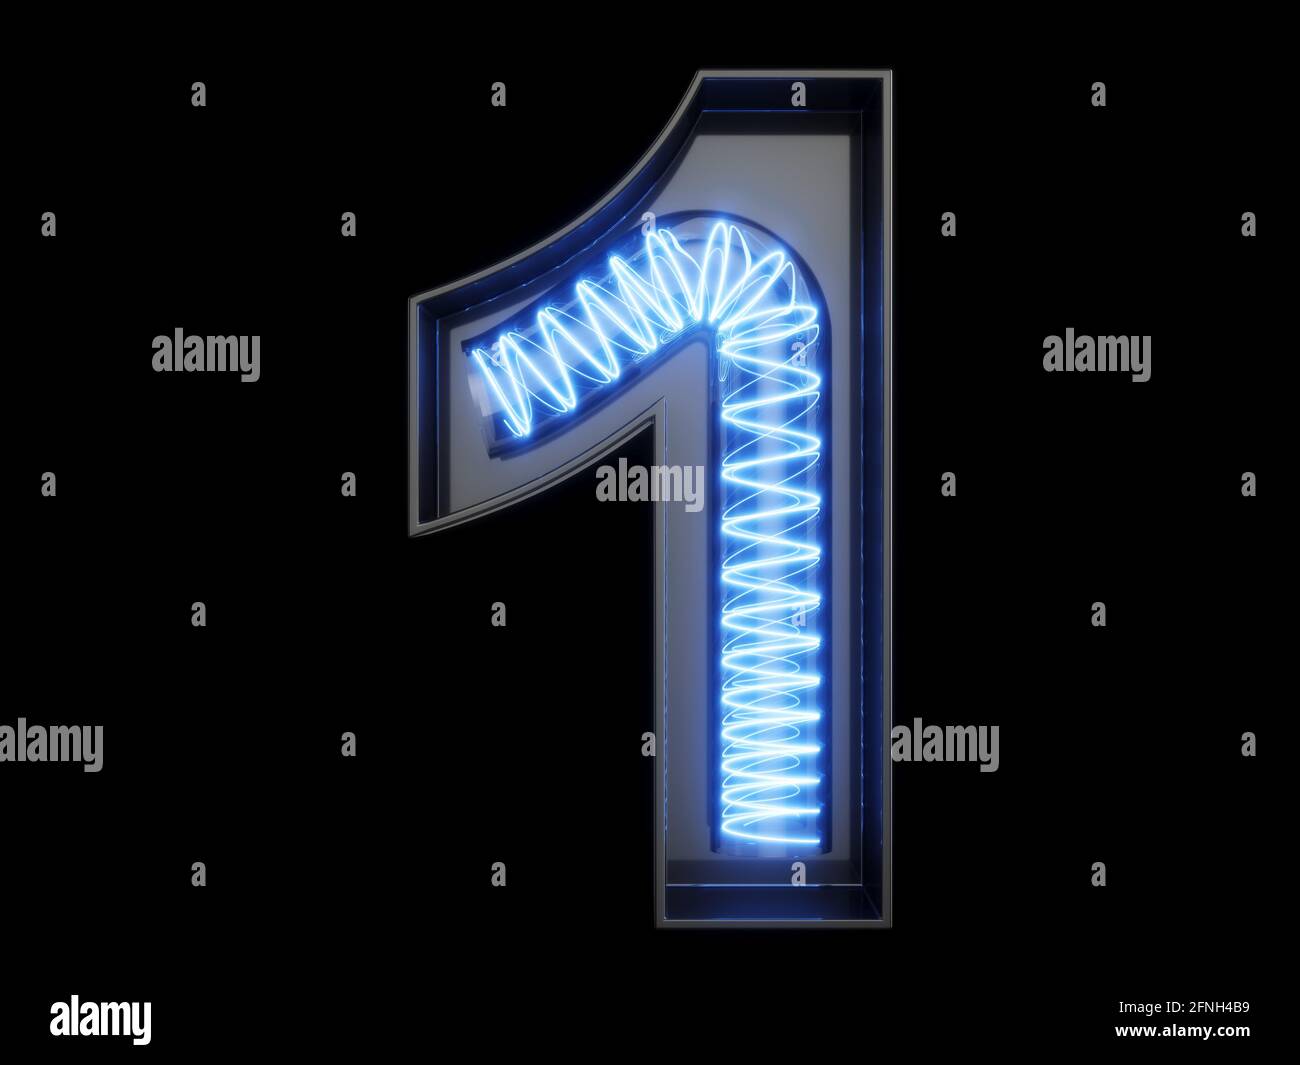 Light bulb spiral glowing digit alphabet character 1 one font. Front view illuminated number 1 symbol on black background. 3d rendering illustration Stock Photo